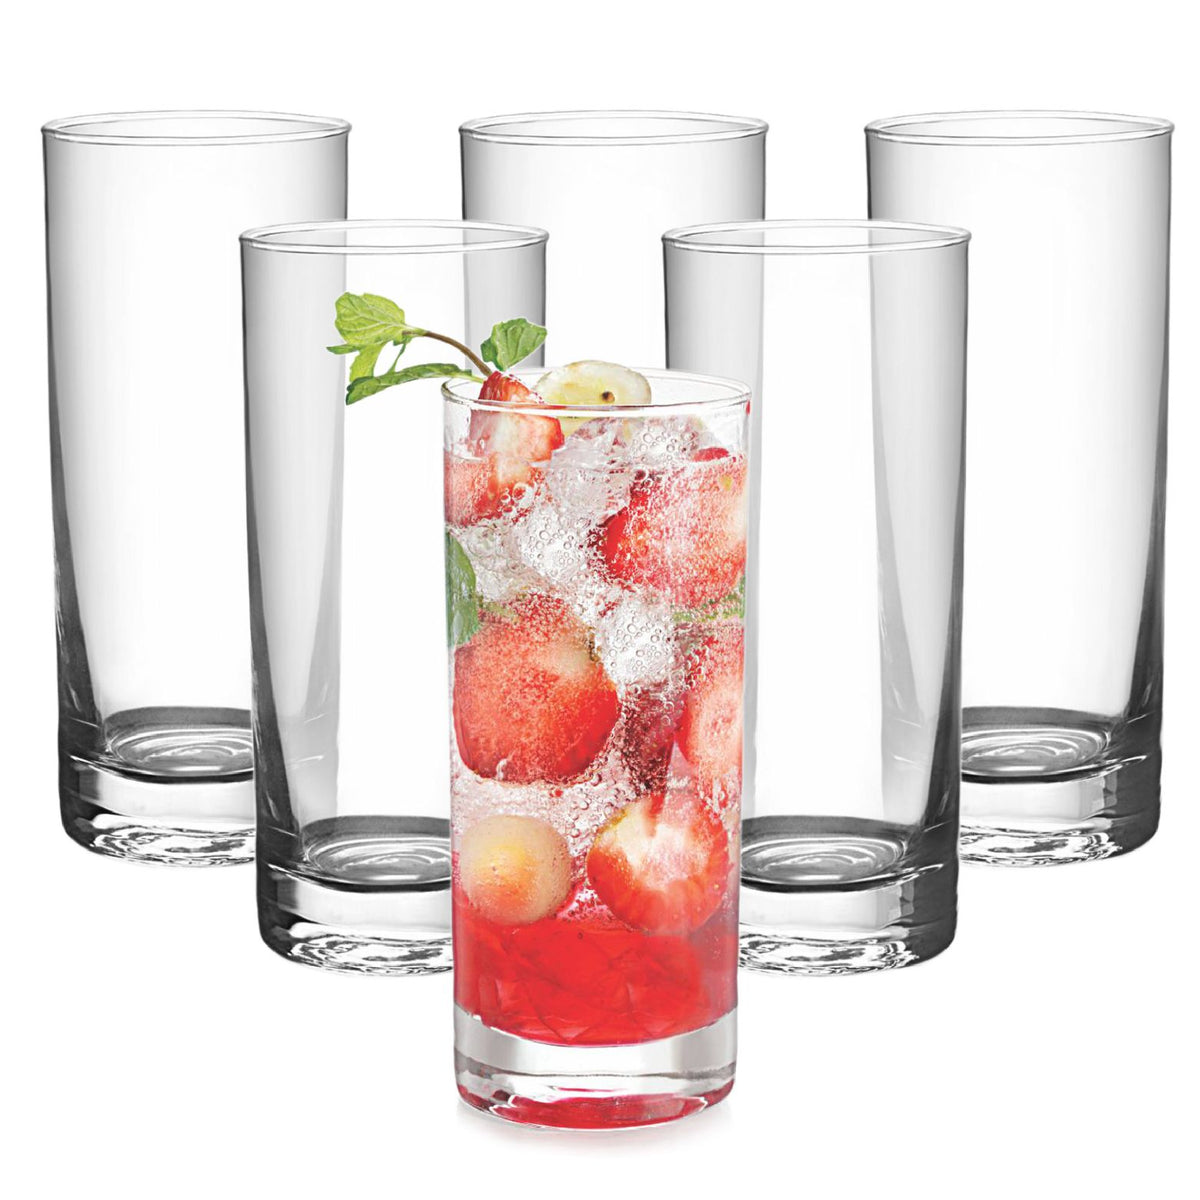 Siena Glass Tumblers, Set of 6 Clear / 285ml / 6 Piece